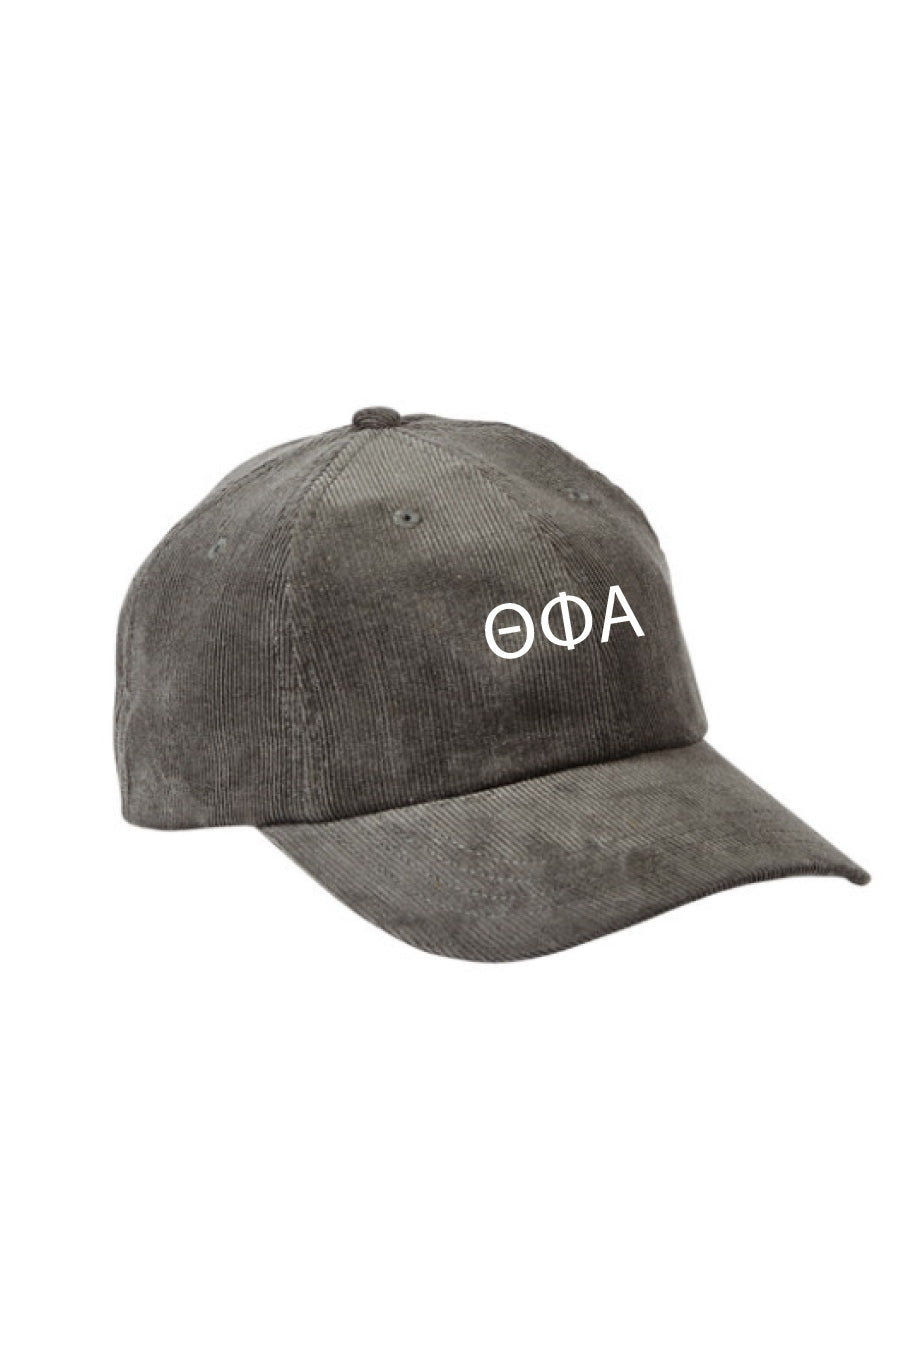 Theta Phi or Lettered Hats